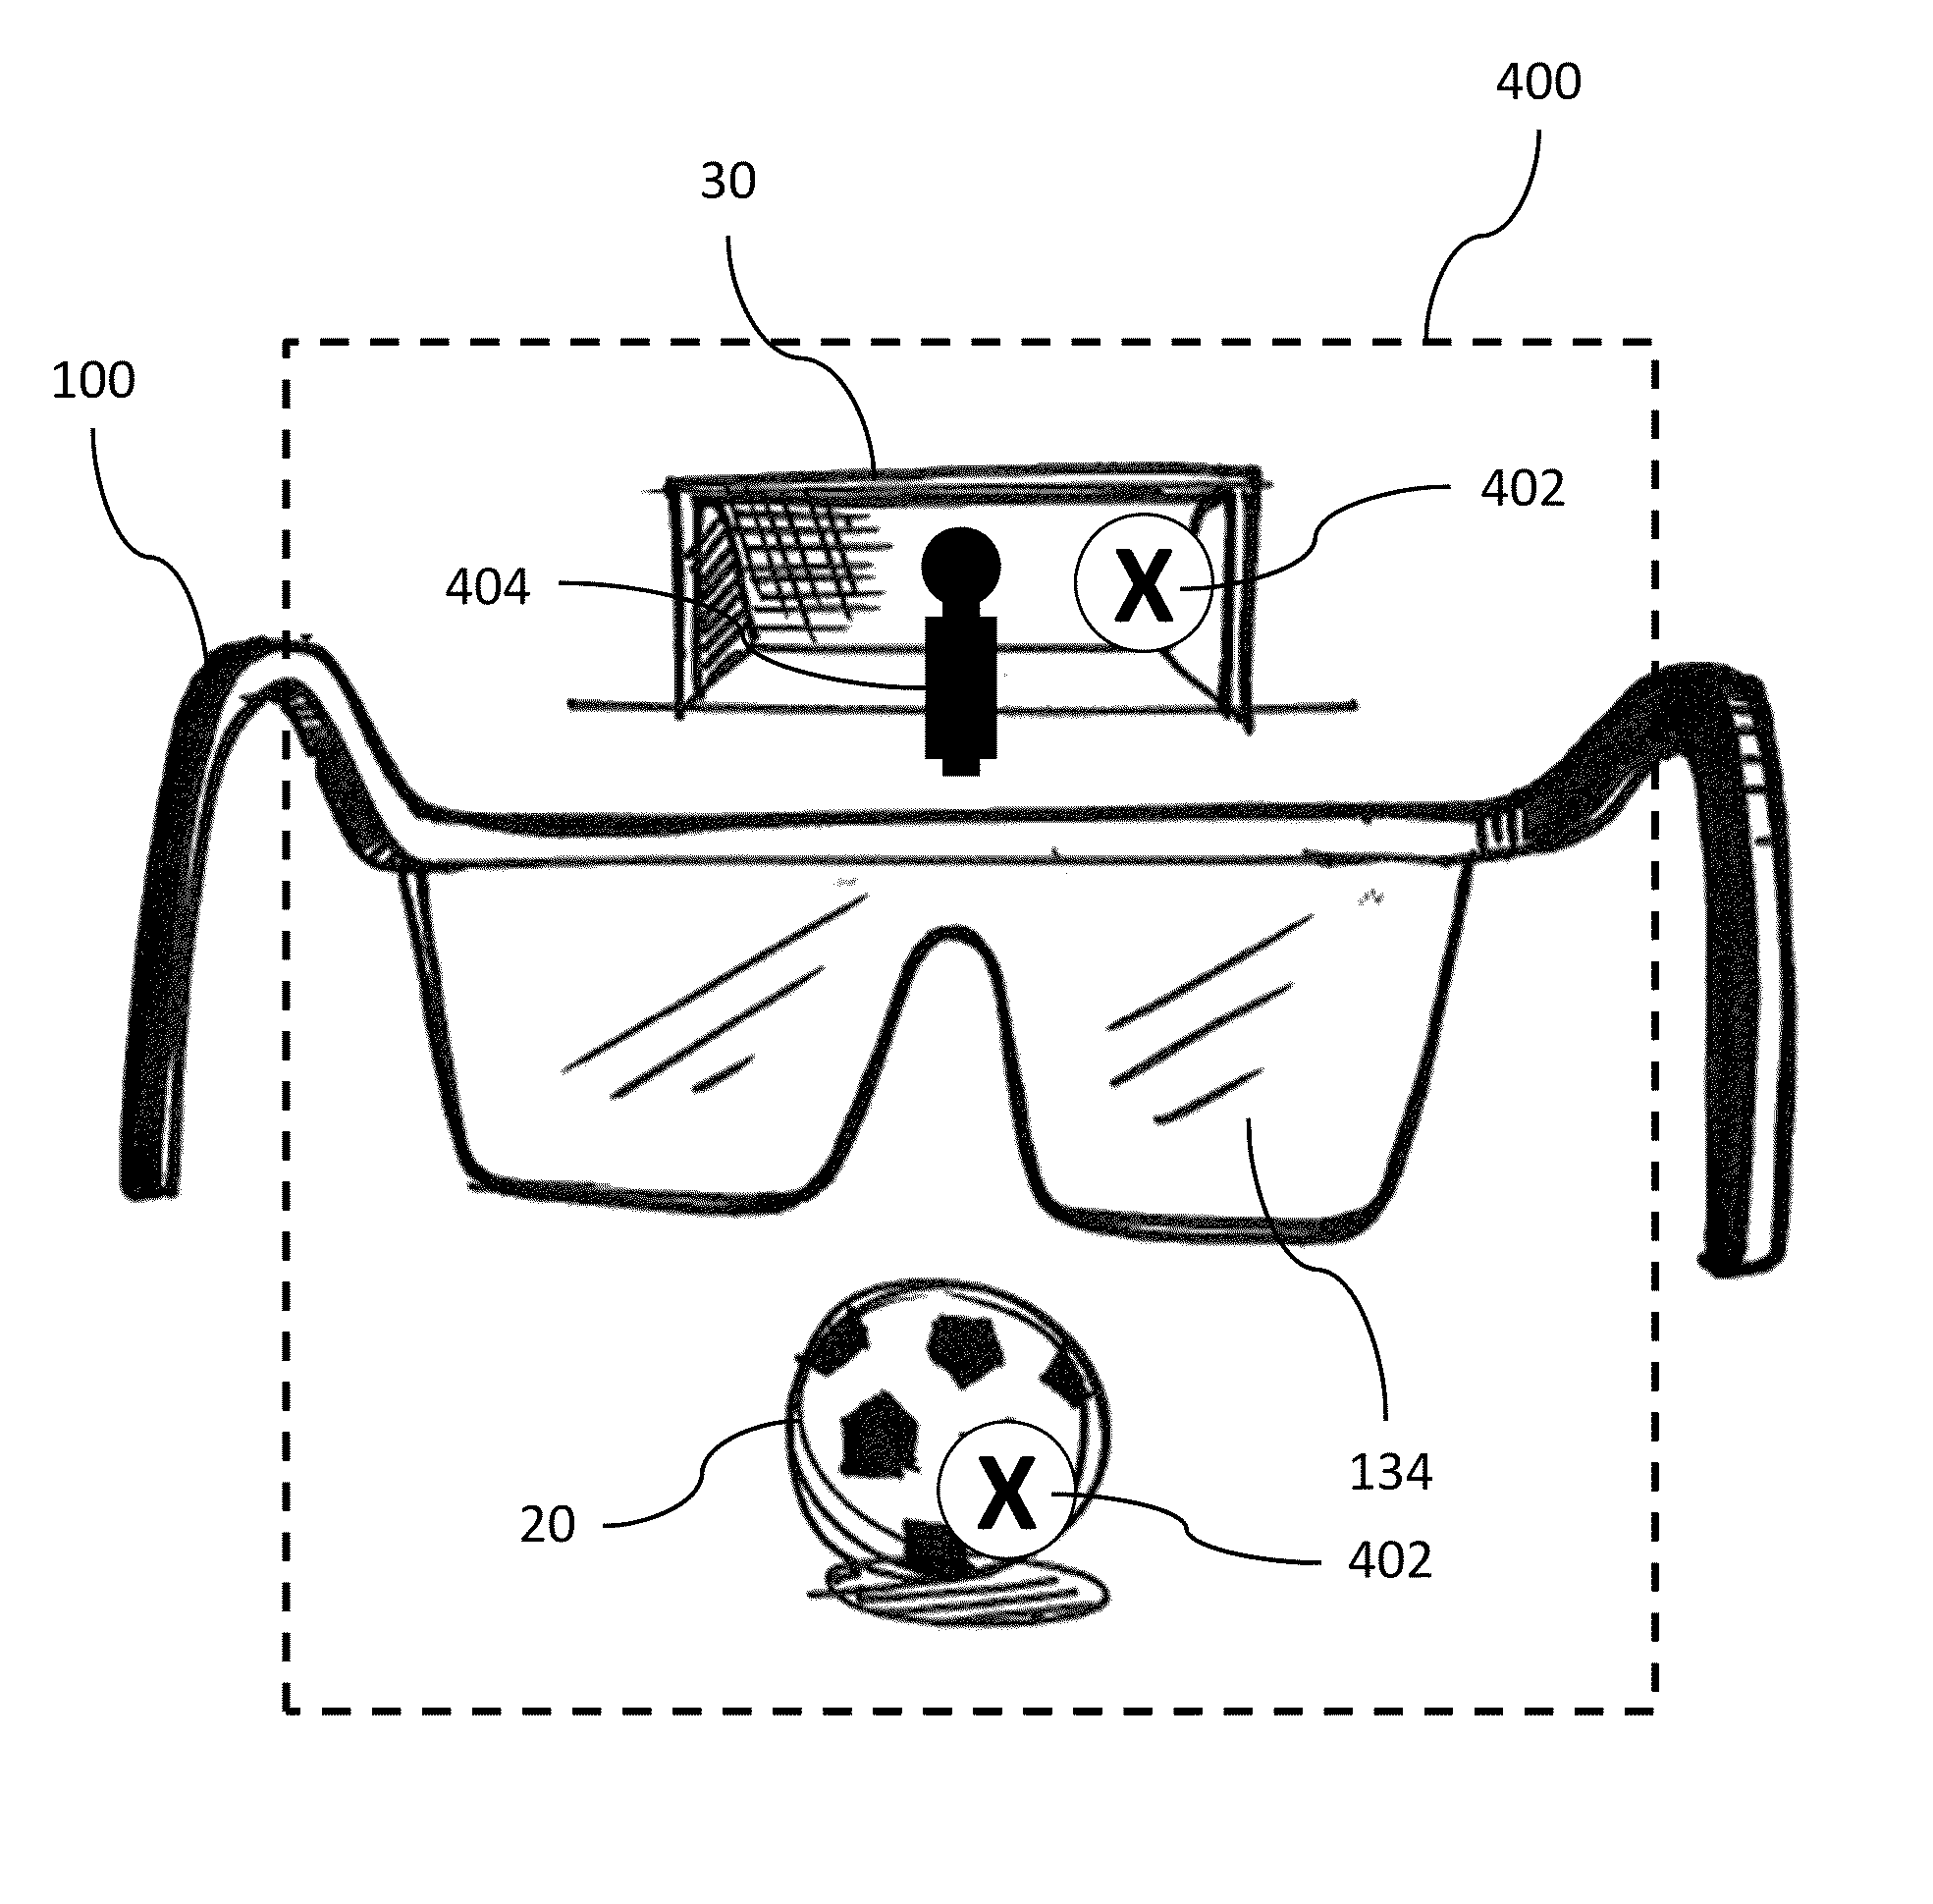 Athletic Activity Heads Up Display Systems and Methods